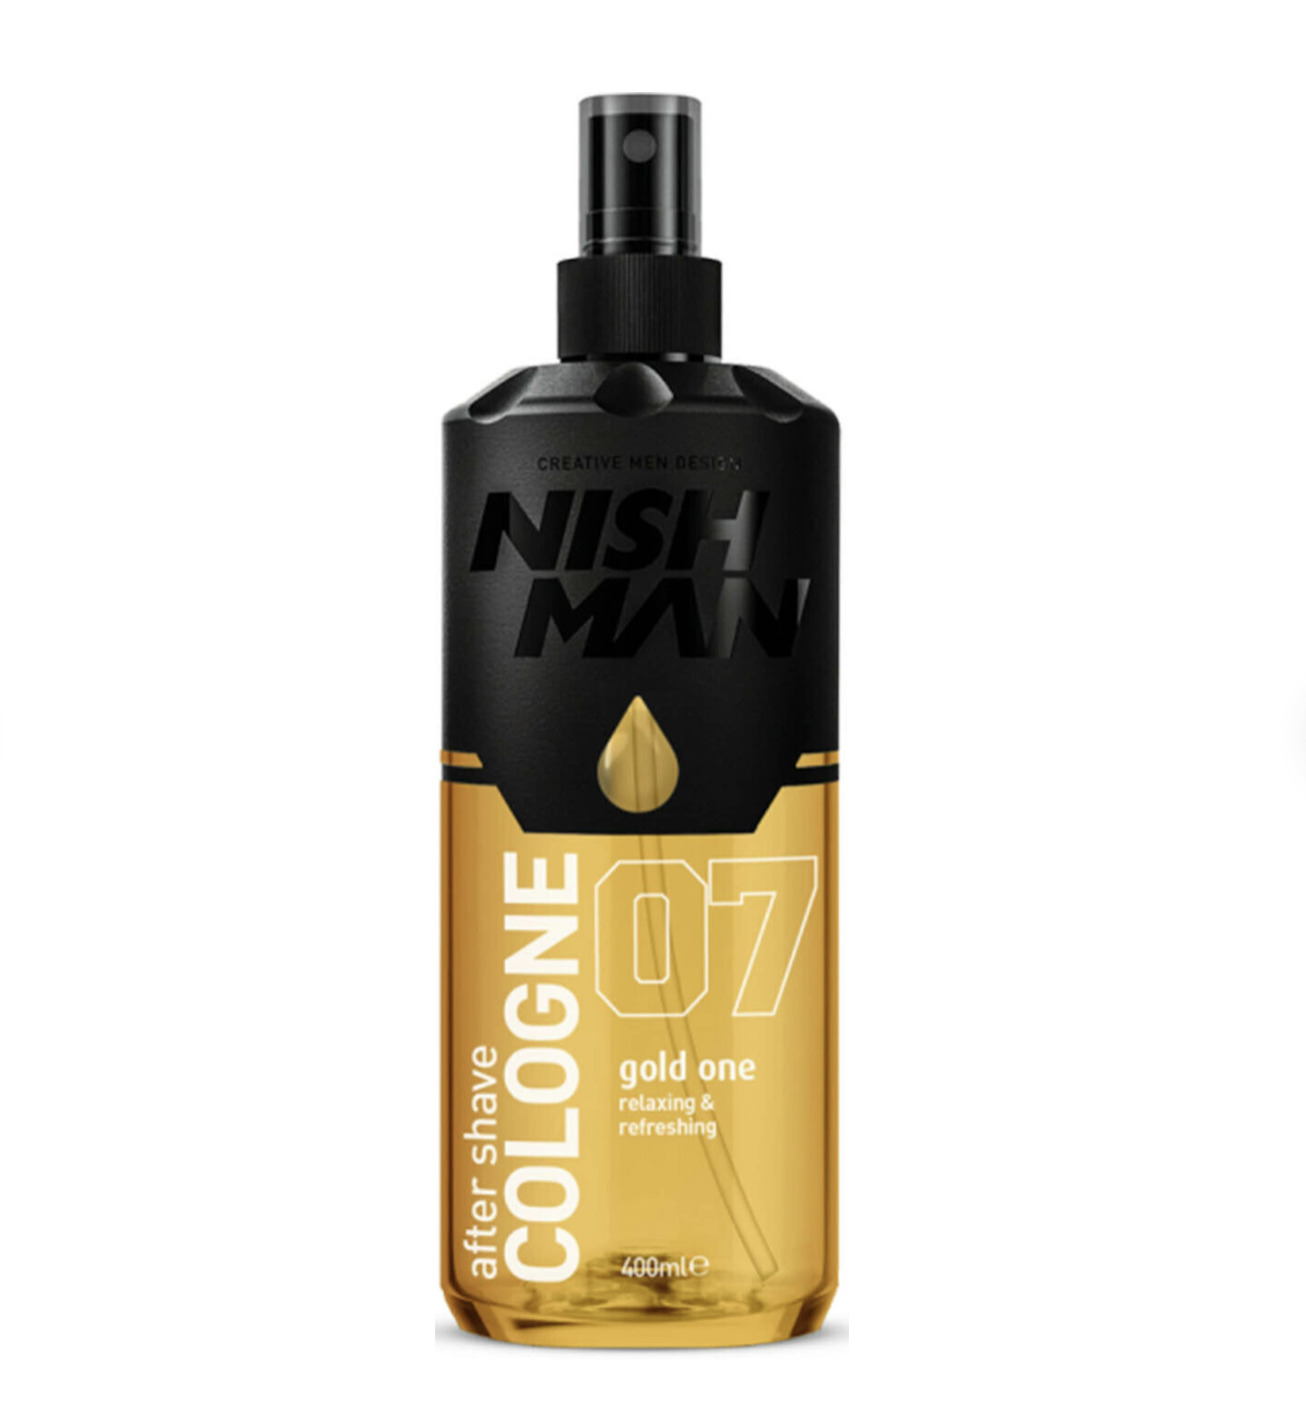 NISHMAN After Shave Cologne 7 gold one 400 ml